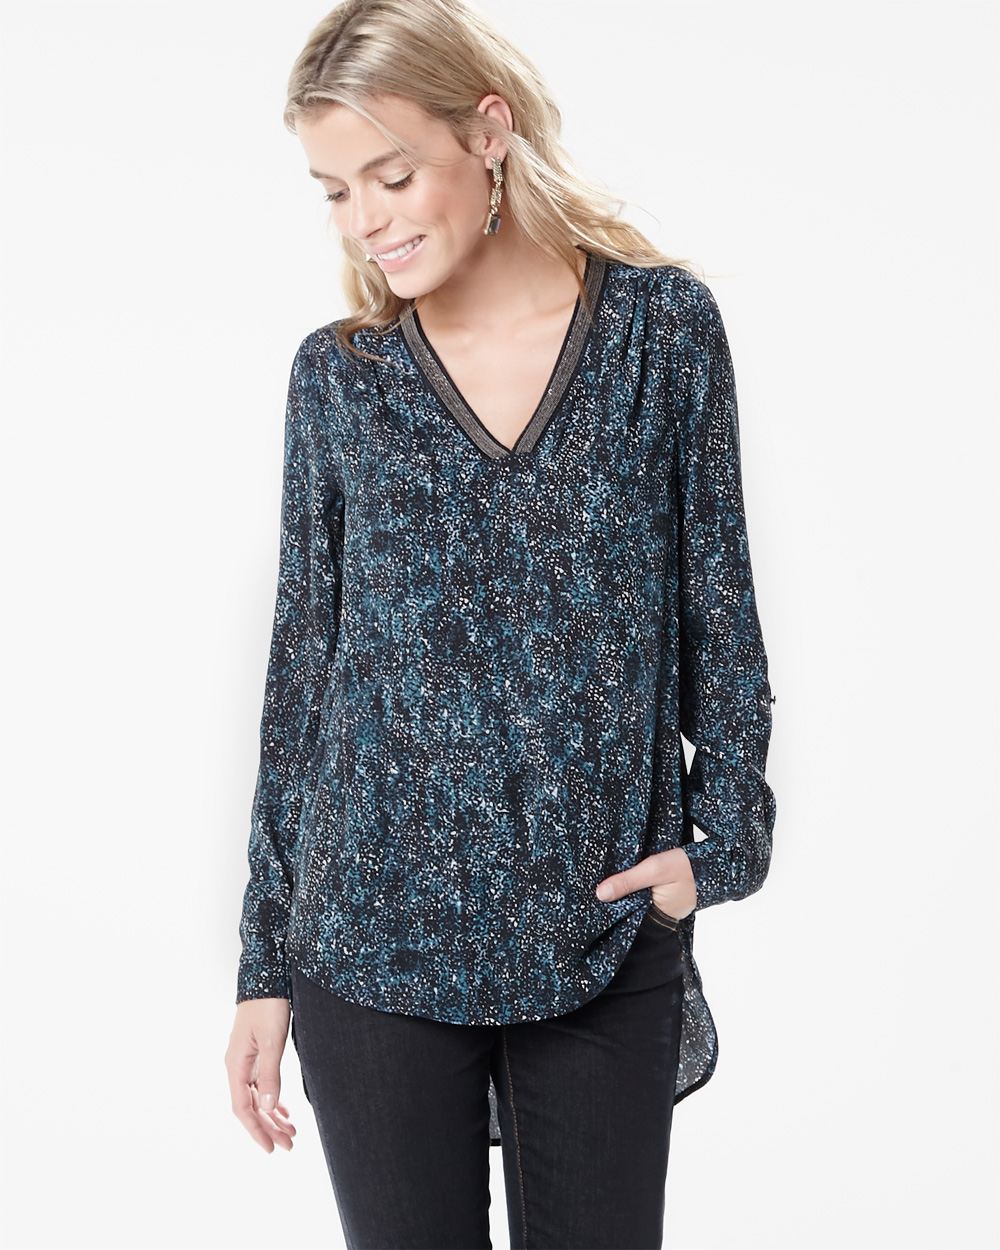 Tunic blouse with beaded neck | RW&CO.